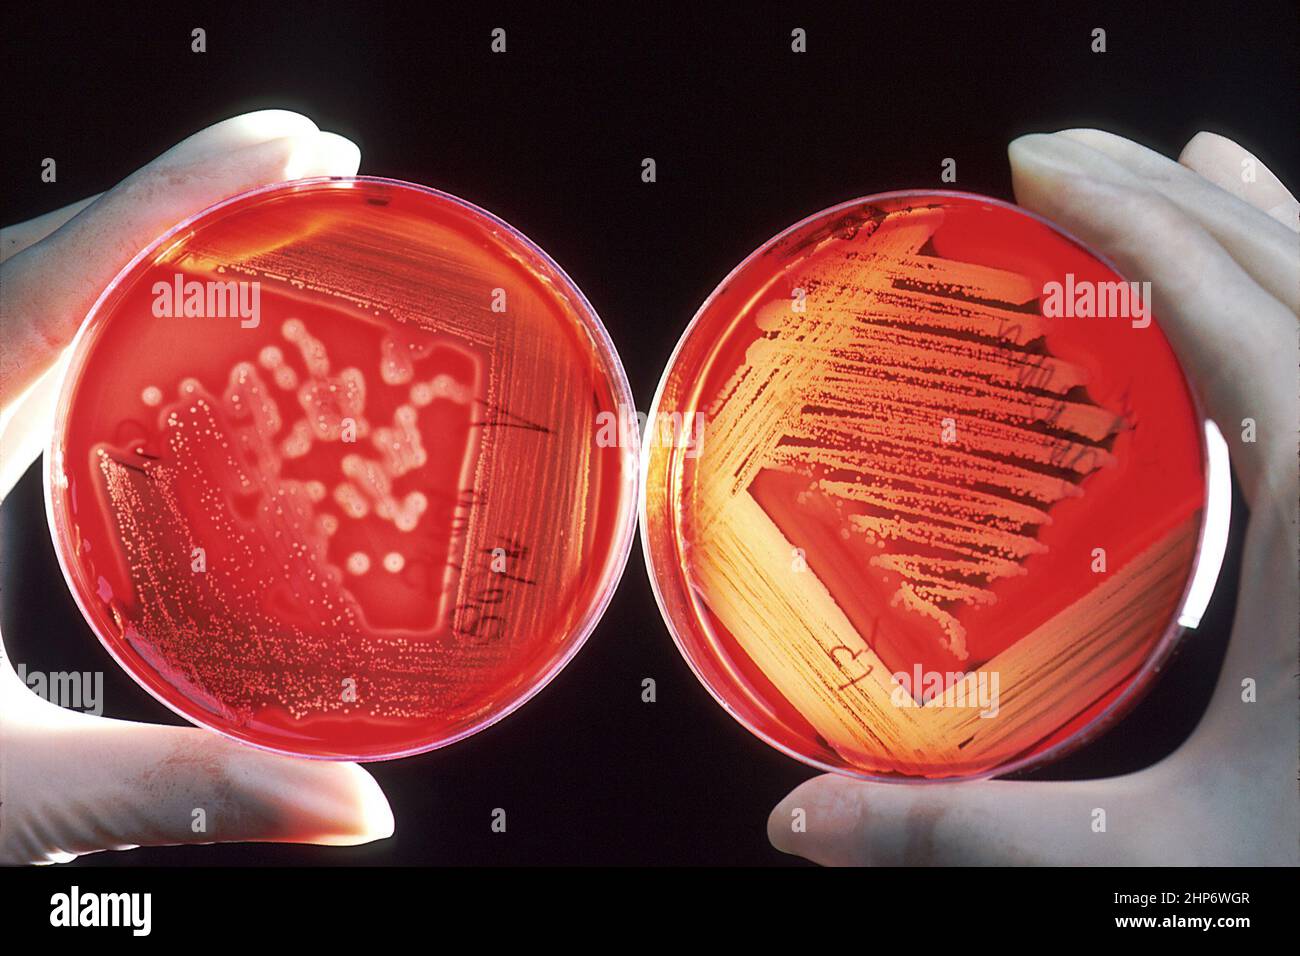 Red blood cells on an agar plate are used to diagnose infection. The plate on the left shows a positive staphyloccus infection. The plate on the right shows a positive streptococcus infection and with the halo effect shows specifically a beta-hemolytic group A. Both plates are being held by a gloved technicians hands. These infections can occur in patients on chemotherapy ca.  October 1985 Stock Photo